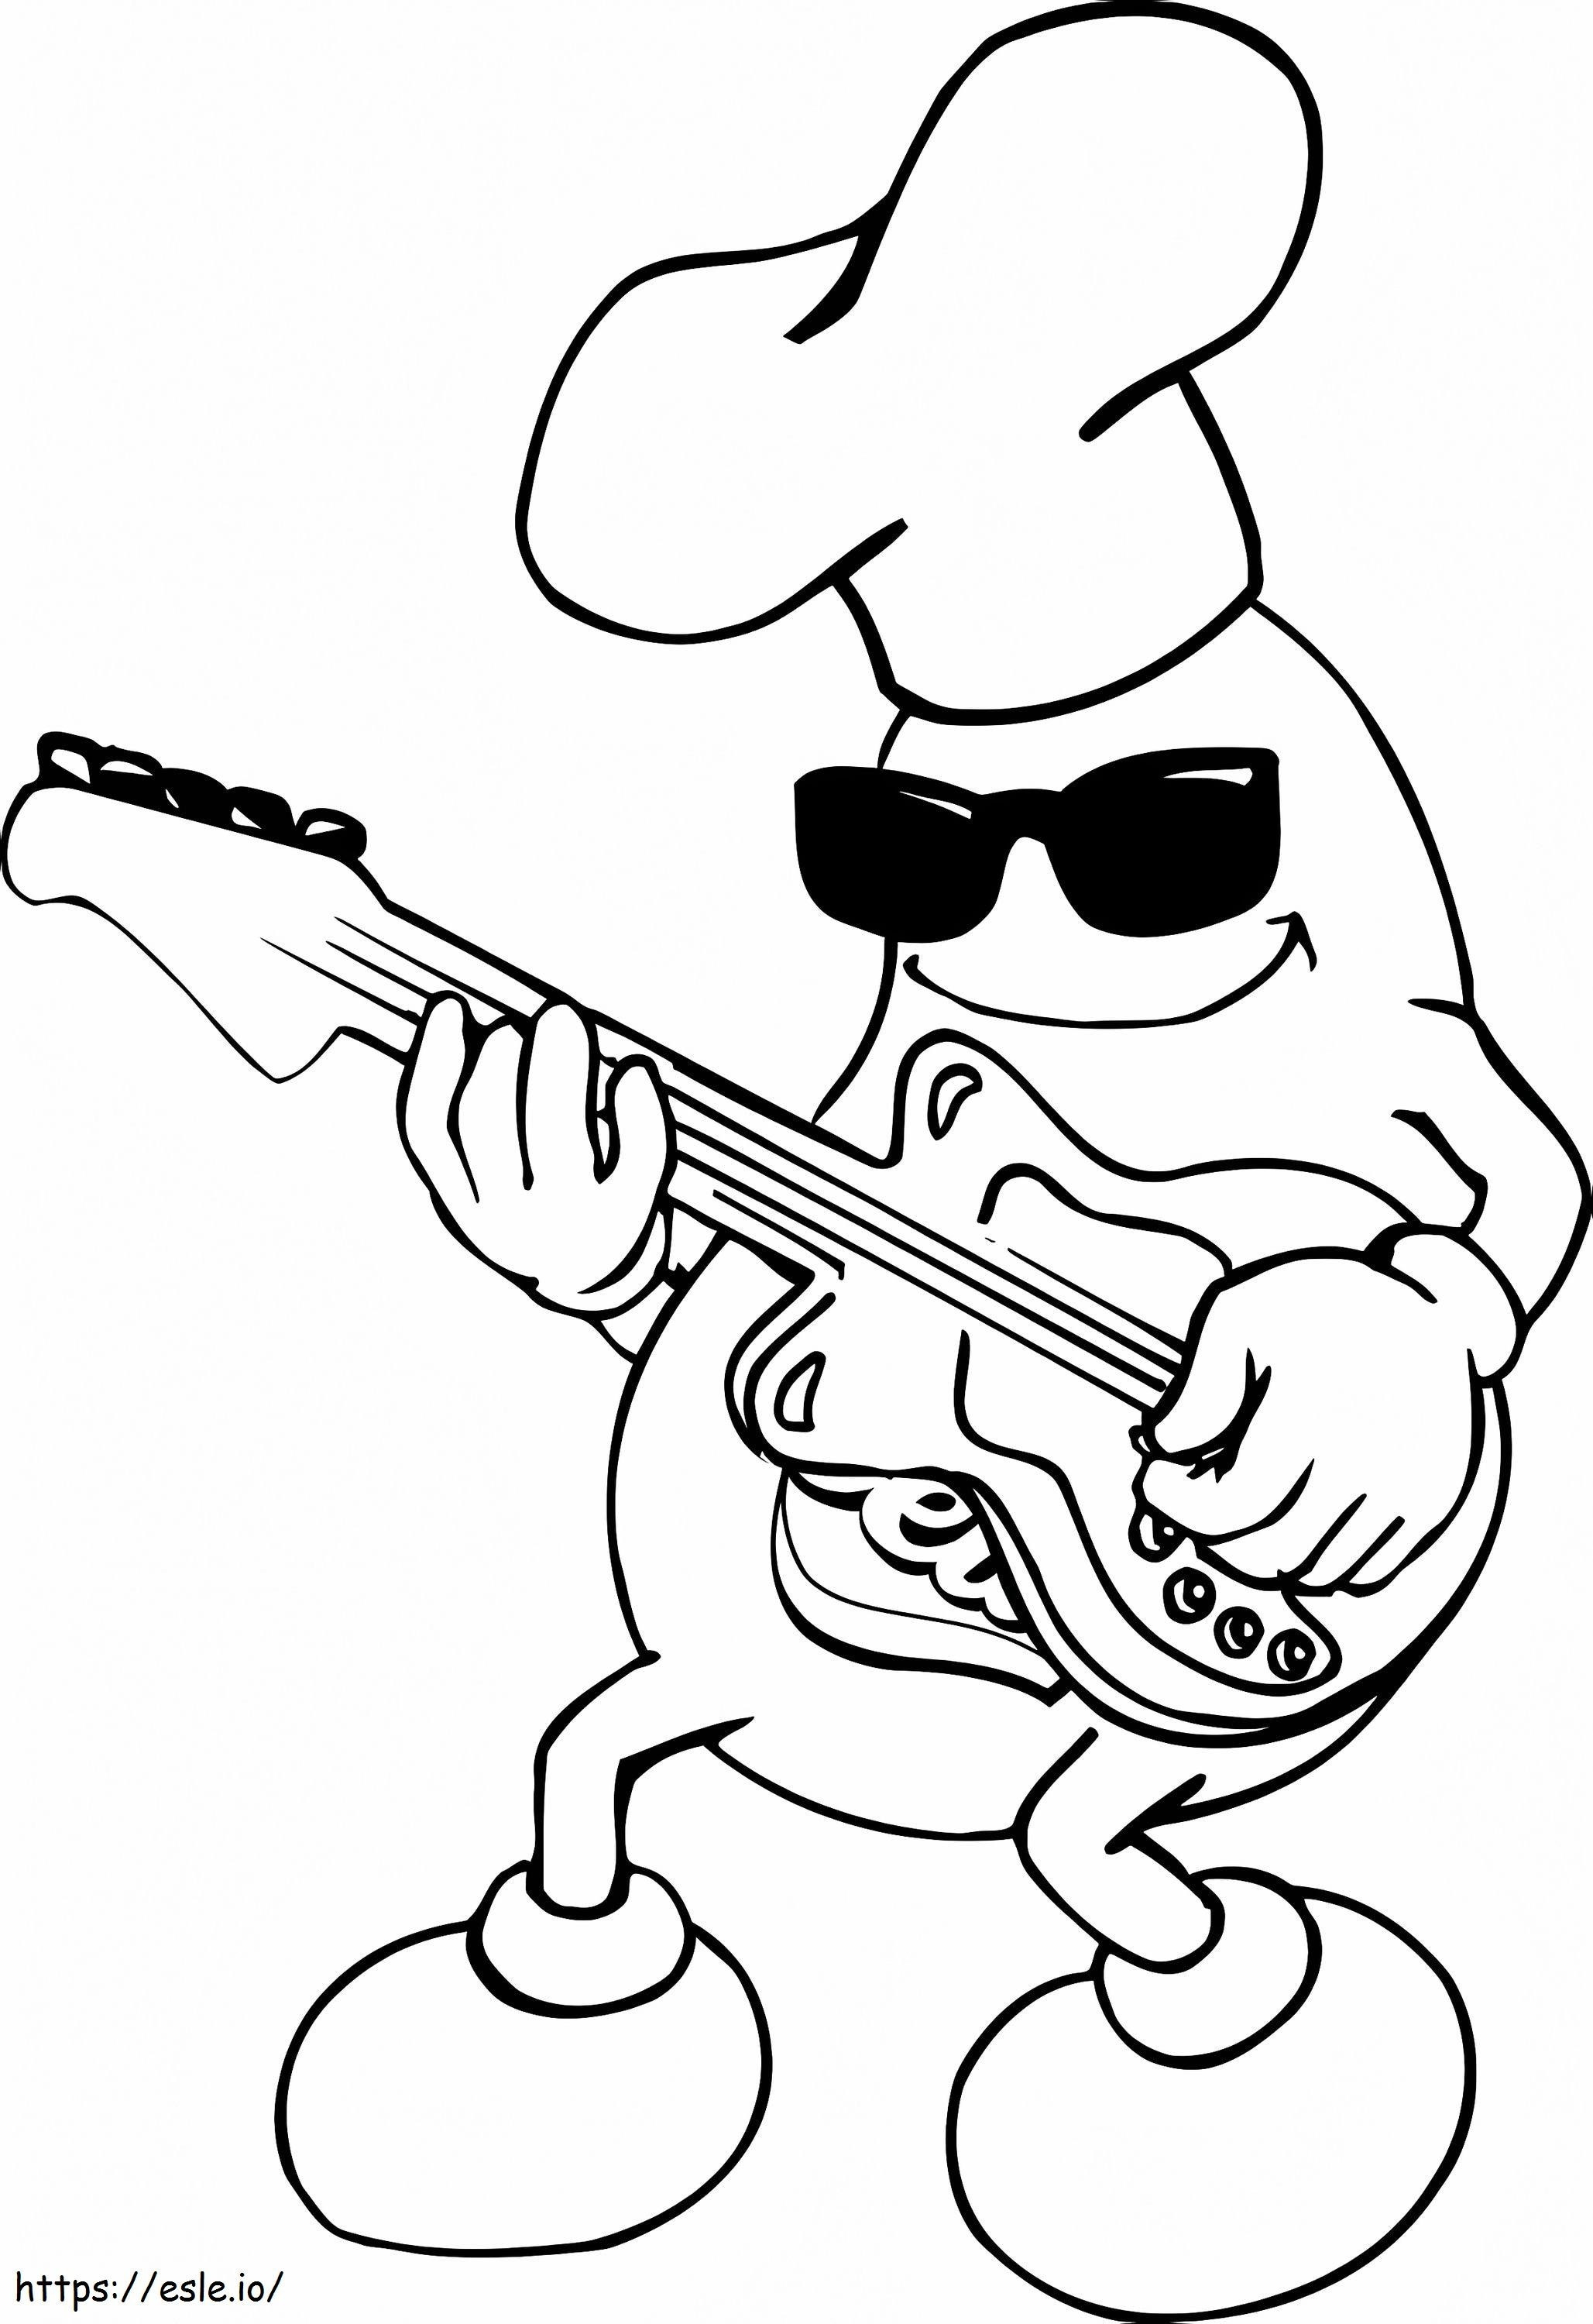 Beans Playing Guitar coloring page